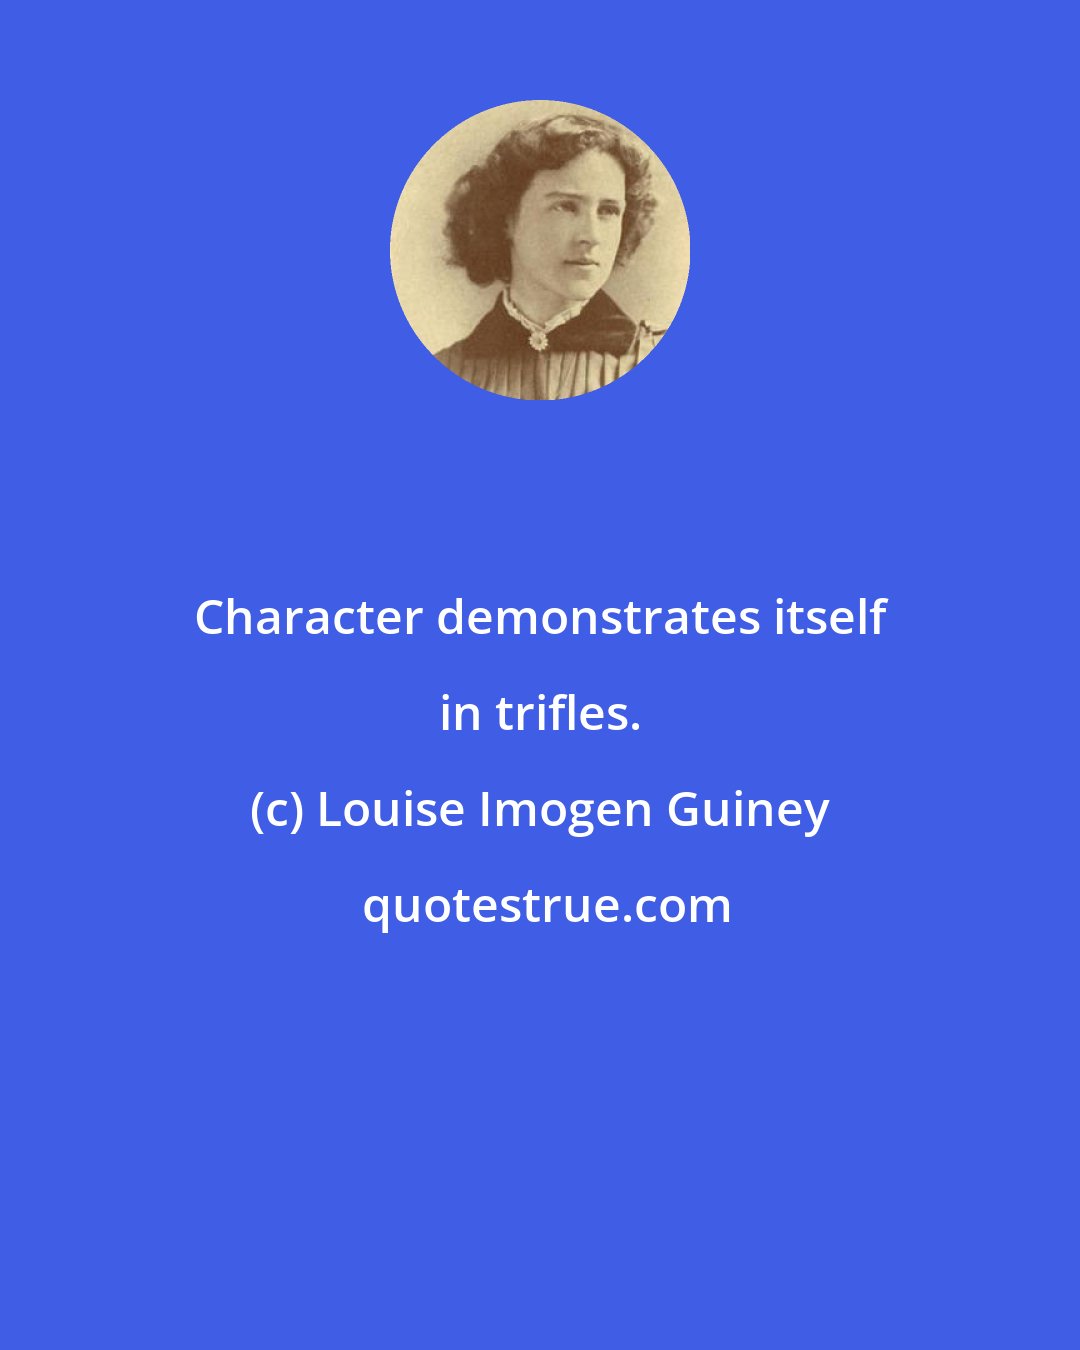 Louise Imogen Guiney: Character demonstrates itself in trifles.